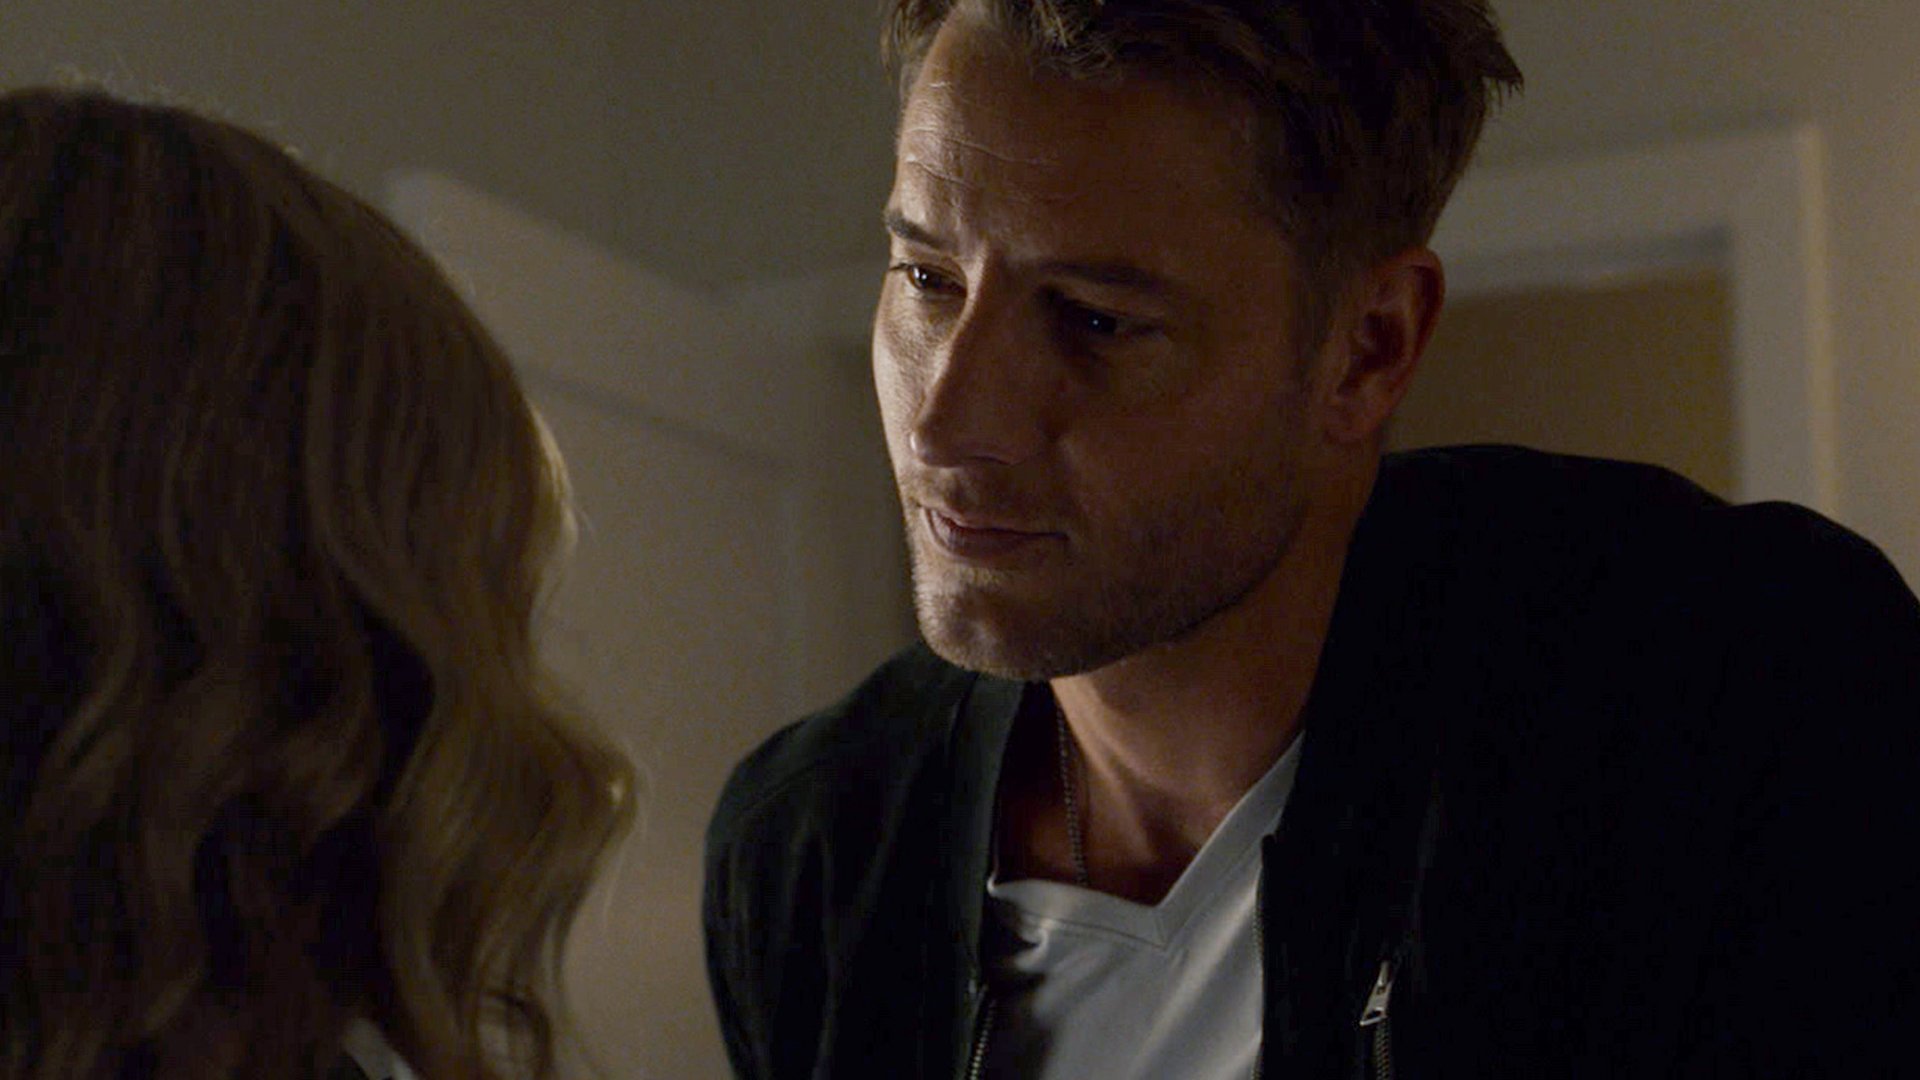 Justin Hartley as Kevin looking at Caitlin Thompson as Madison in ‘This Is Us’ Season 5 Episode 14